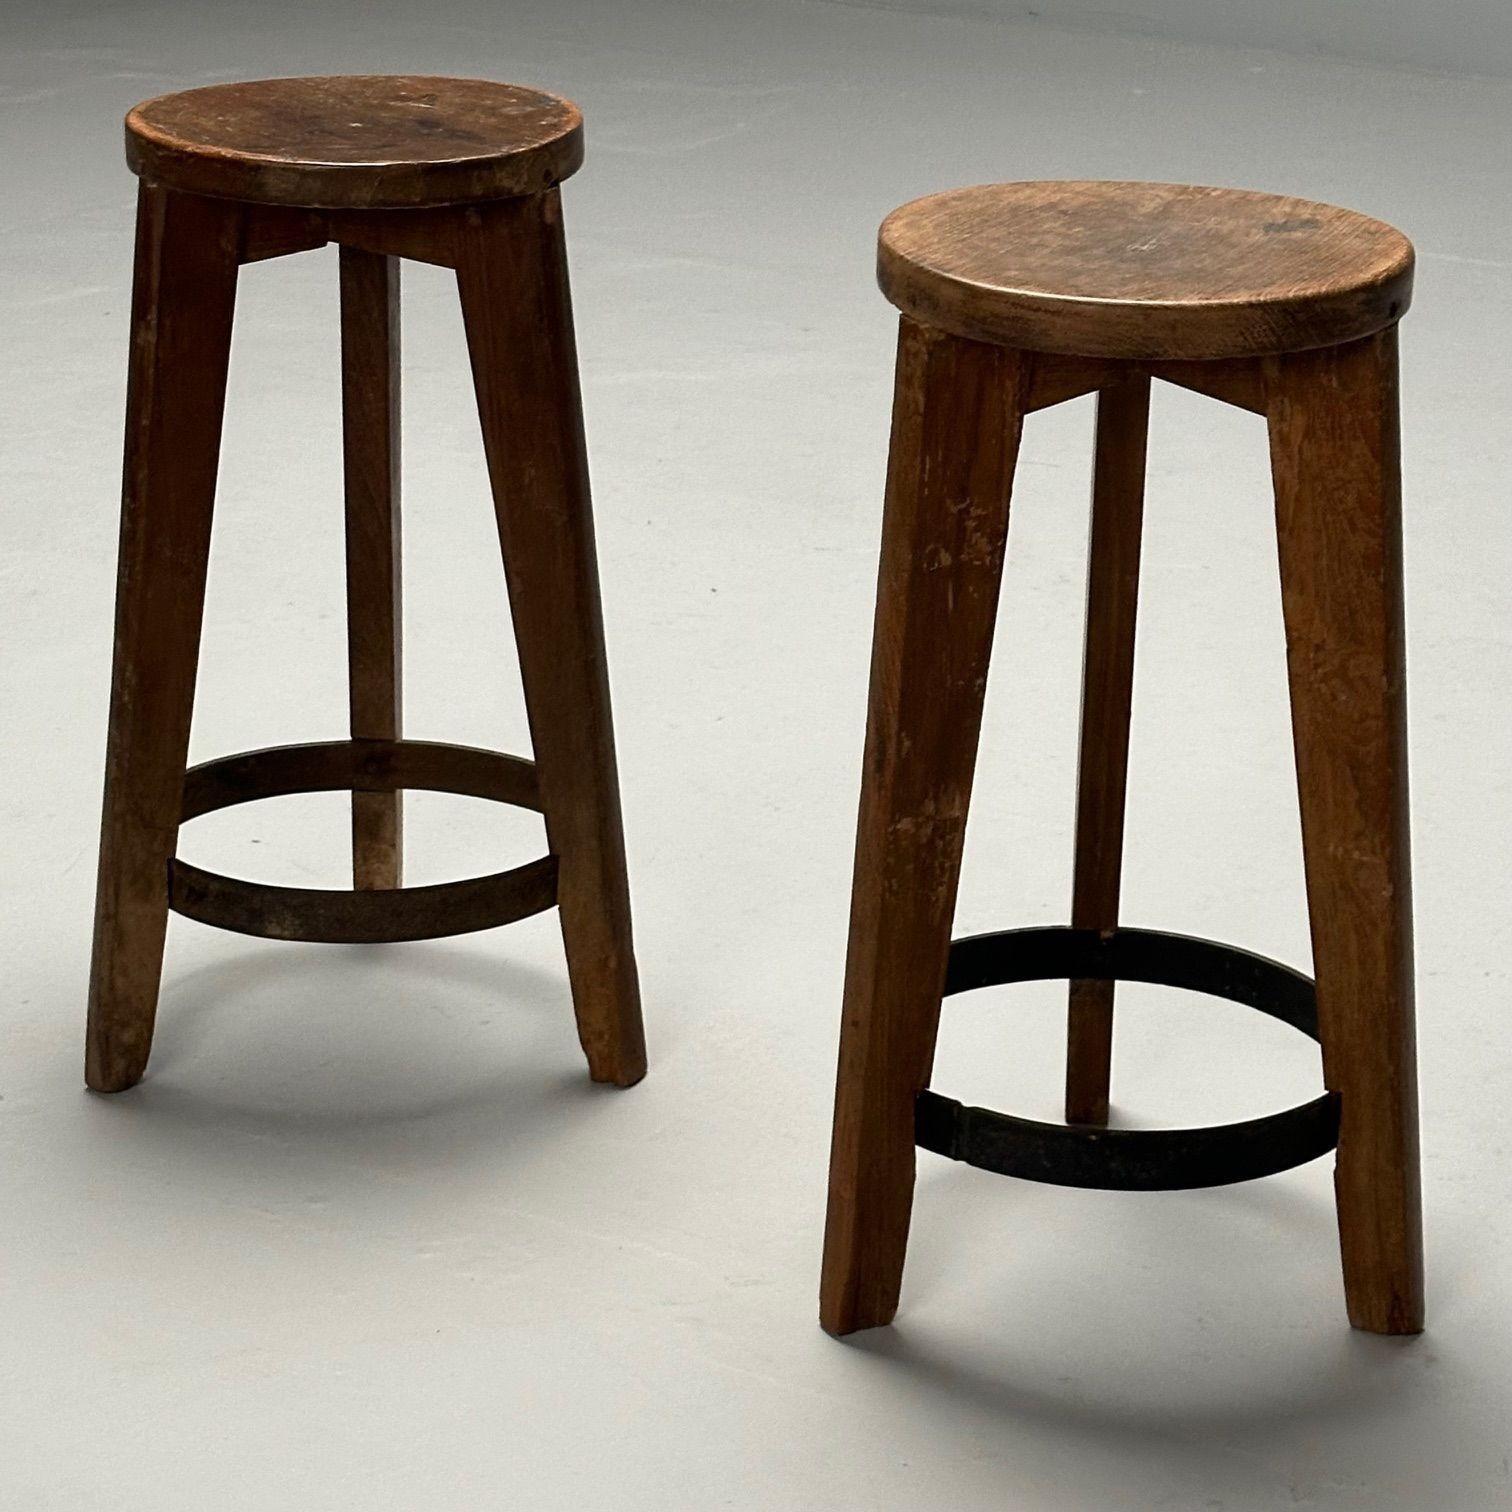 Pierre Jeanneret, French Mid-Century Modern, High Bar Stools, Teak, Chandigarh, India c. 1960s

A pair of round stools with wood seats from Chandigarh, India circa 1965-1966. Great patina with round metal supports toward the bottom of each piece.